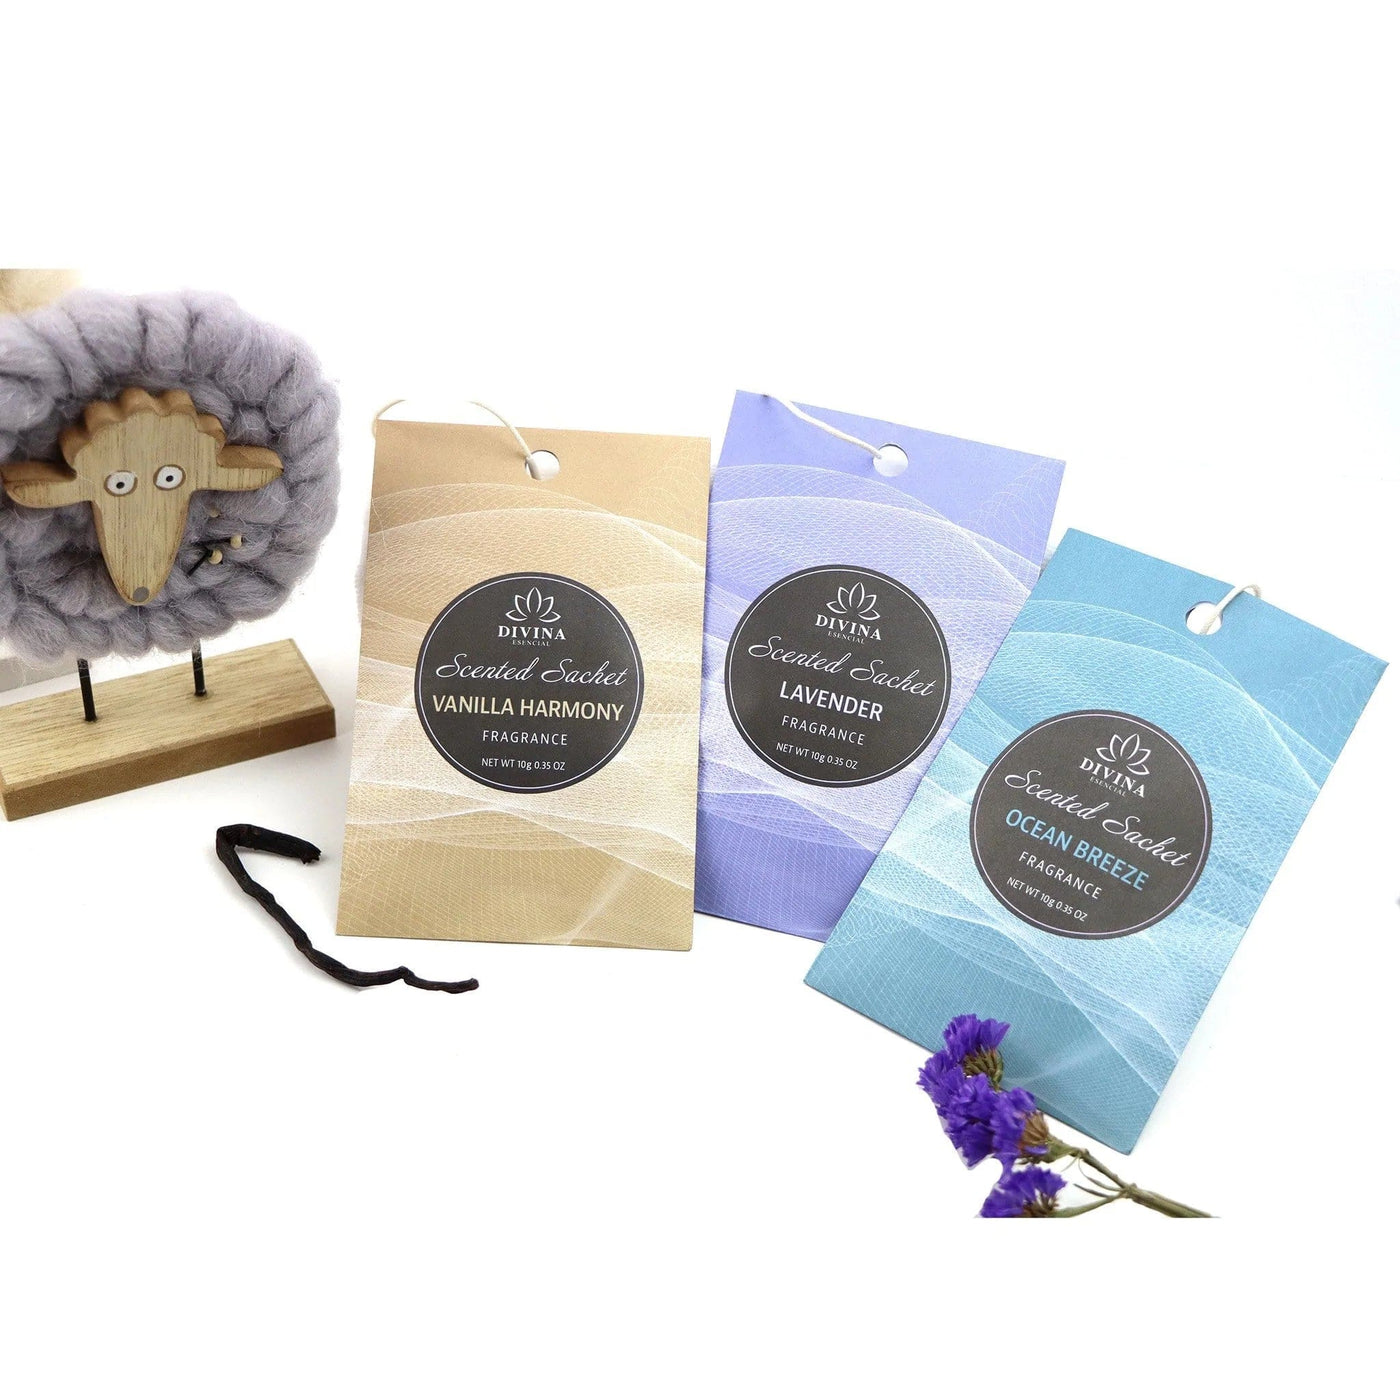 Free scented sachet samples